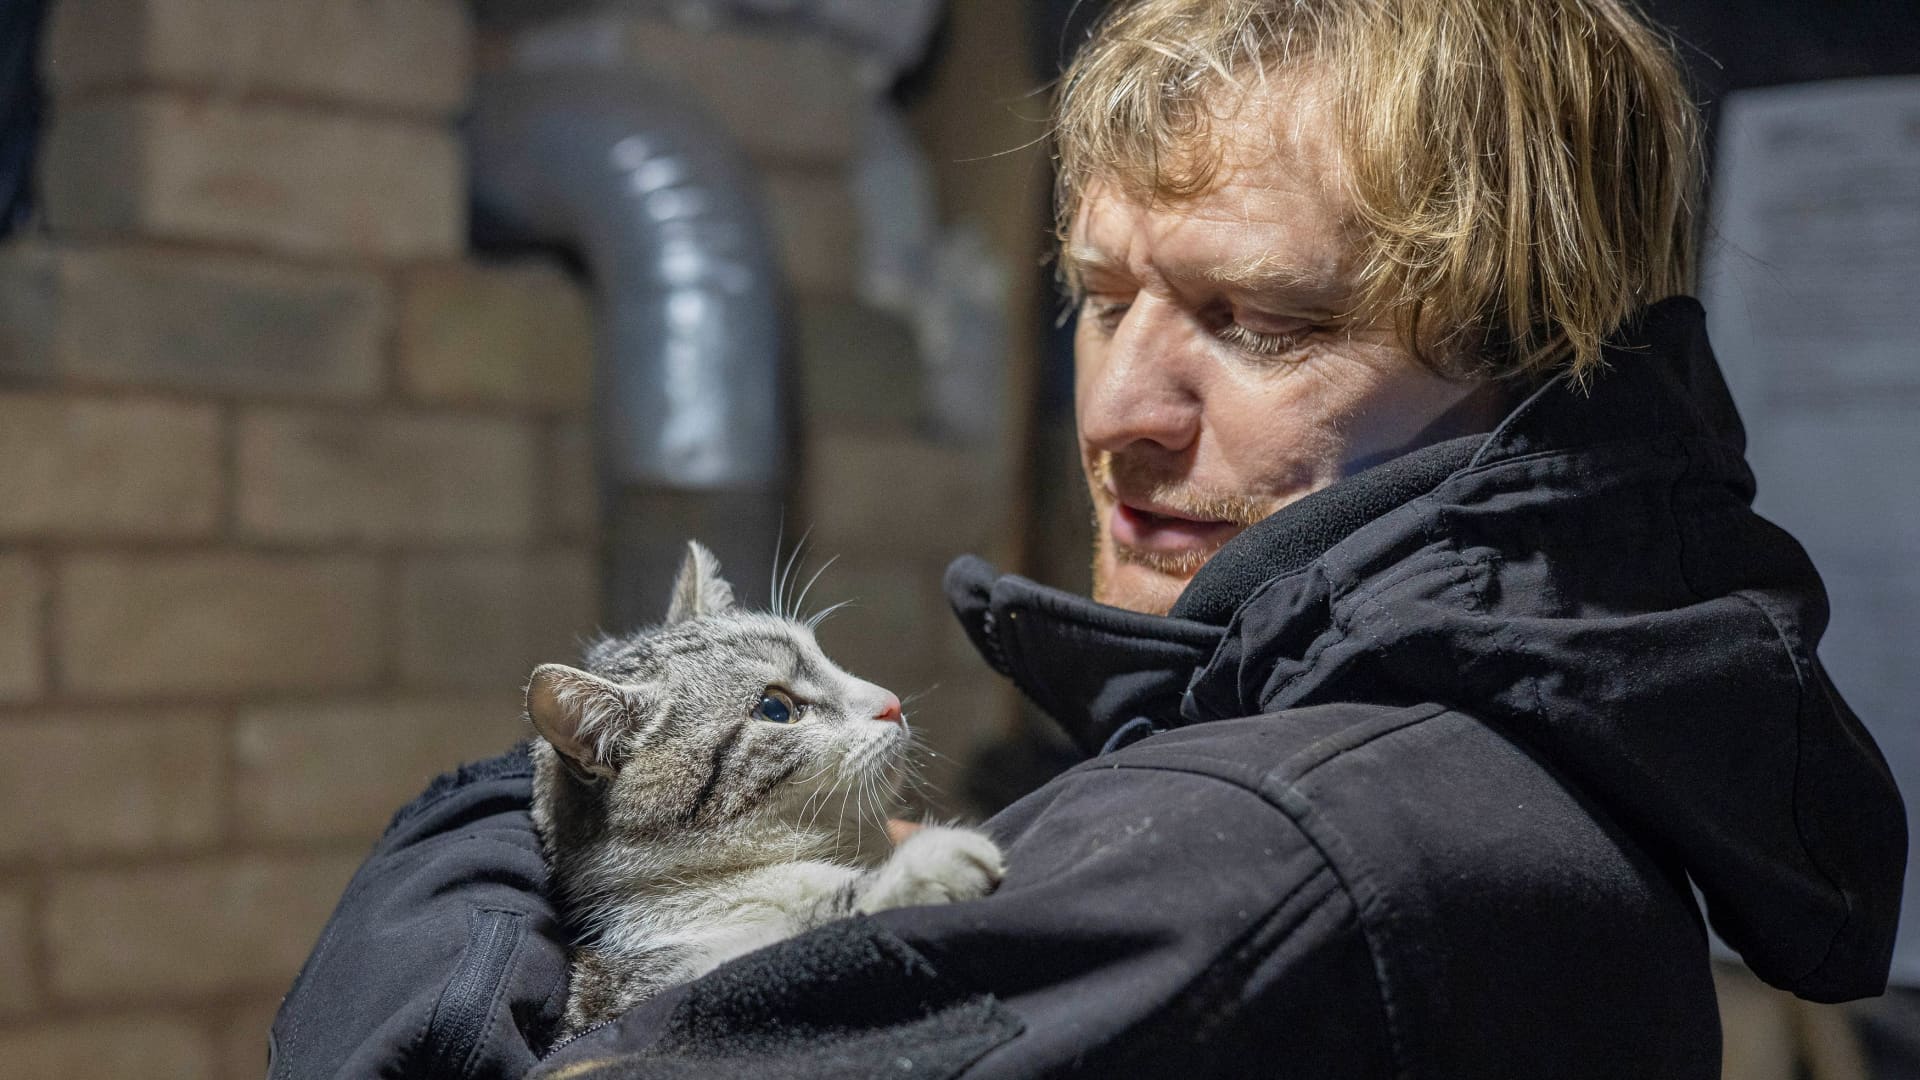 Ukrainian photographer Maksim Levin holds a cat near the line of separation from Russian-backed separatists in Luhansk region, Ukraine January 6, 2022. Picture taken January 6, 2022.